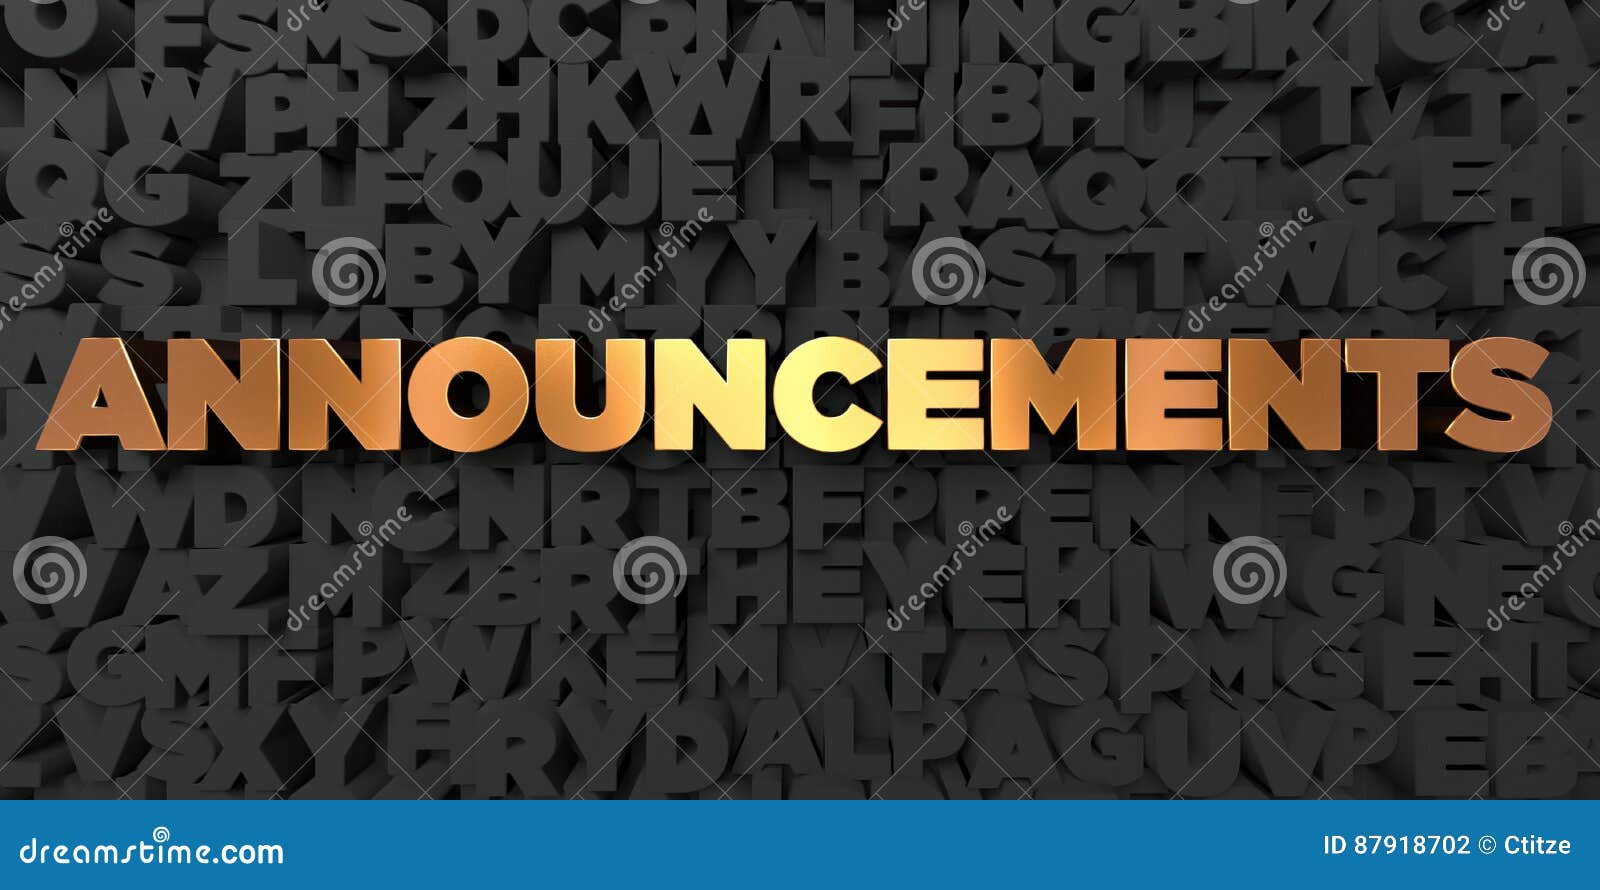 announcements - gold text on black background - 3d rendered royalty free stock picture